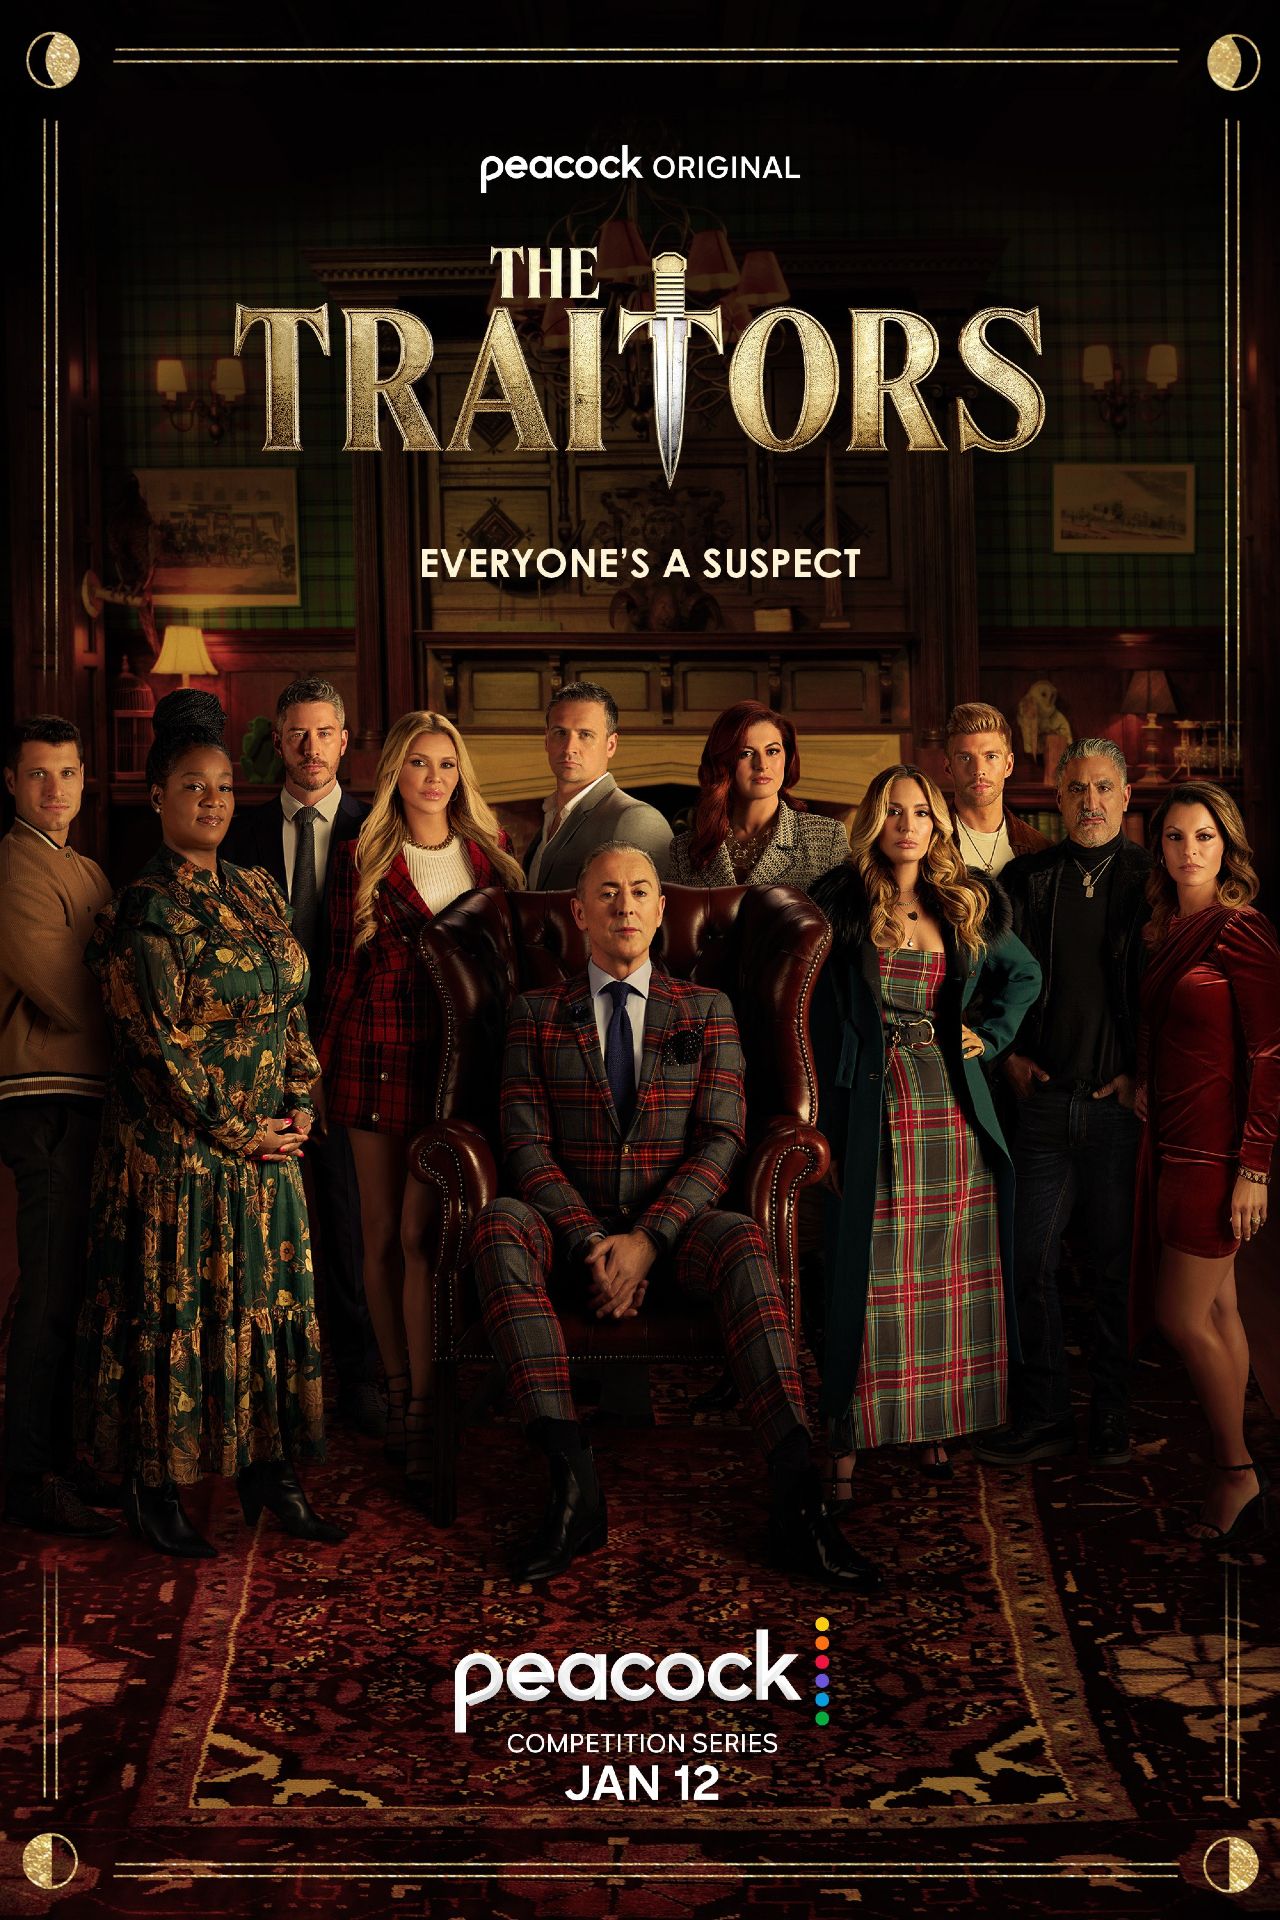 The Traitors US TV Series Poster